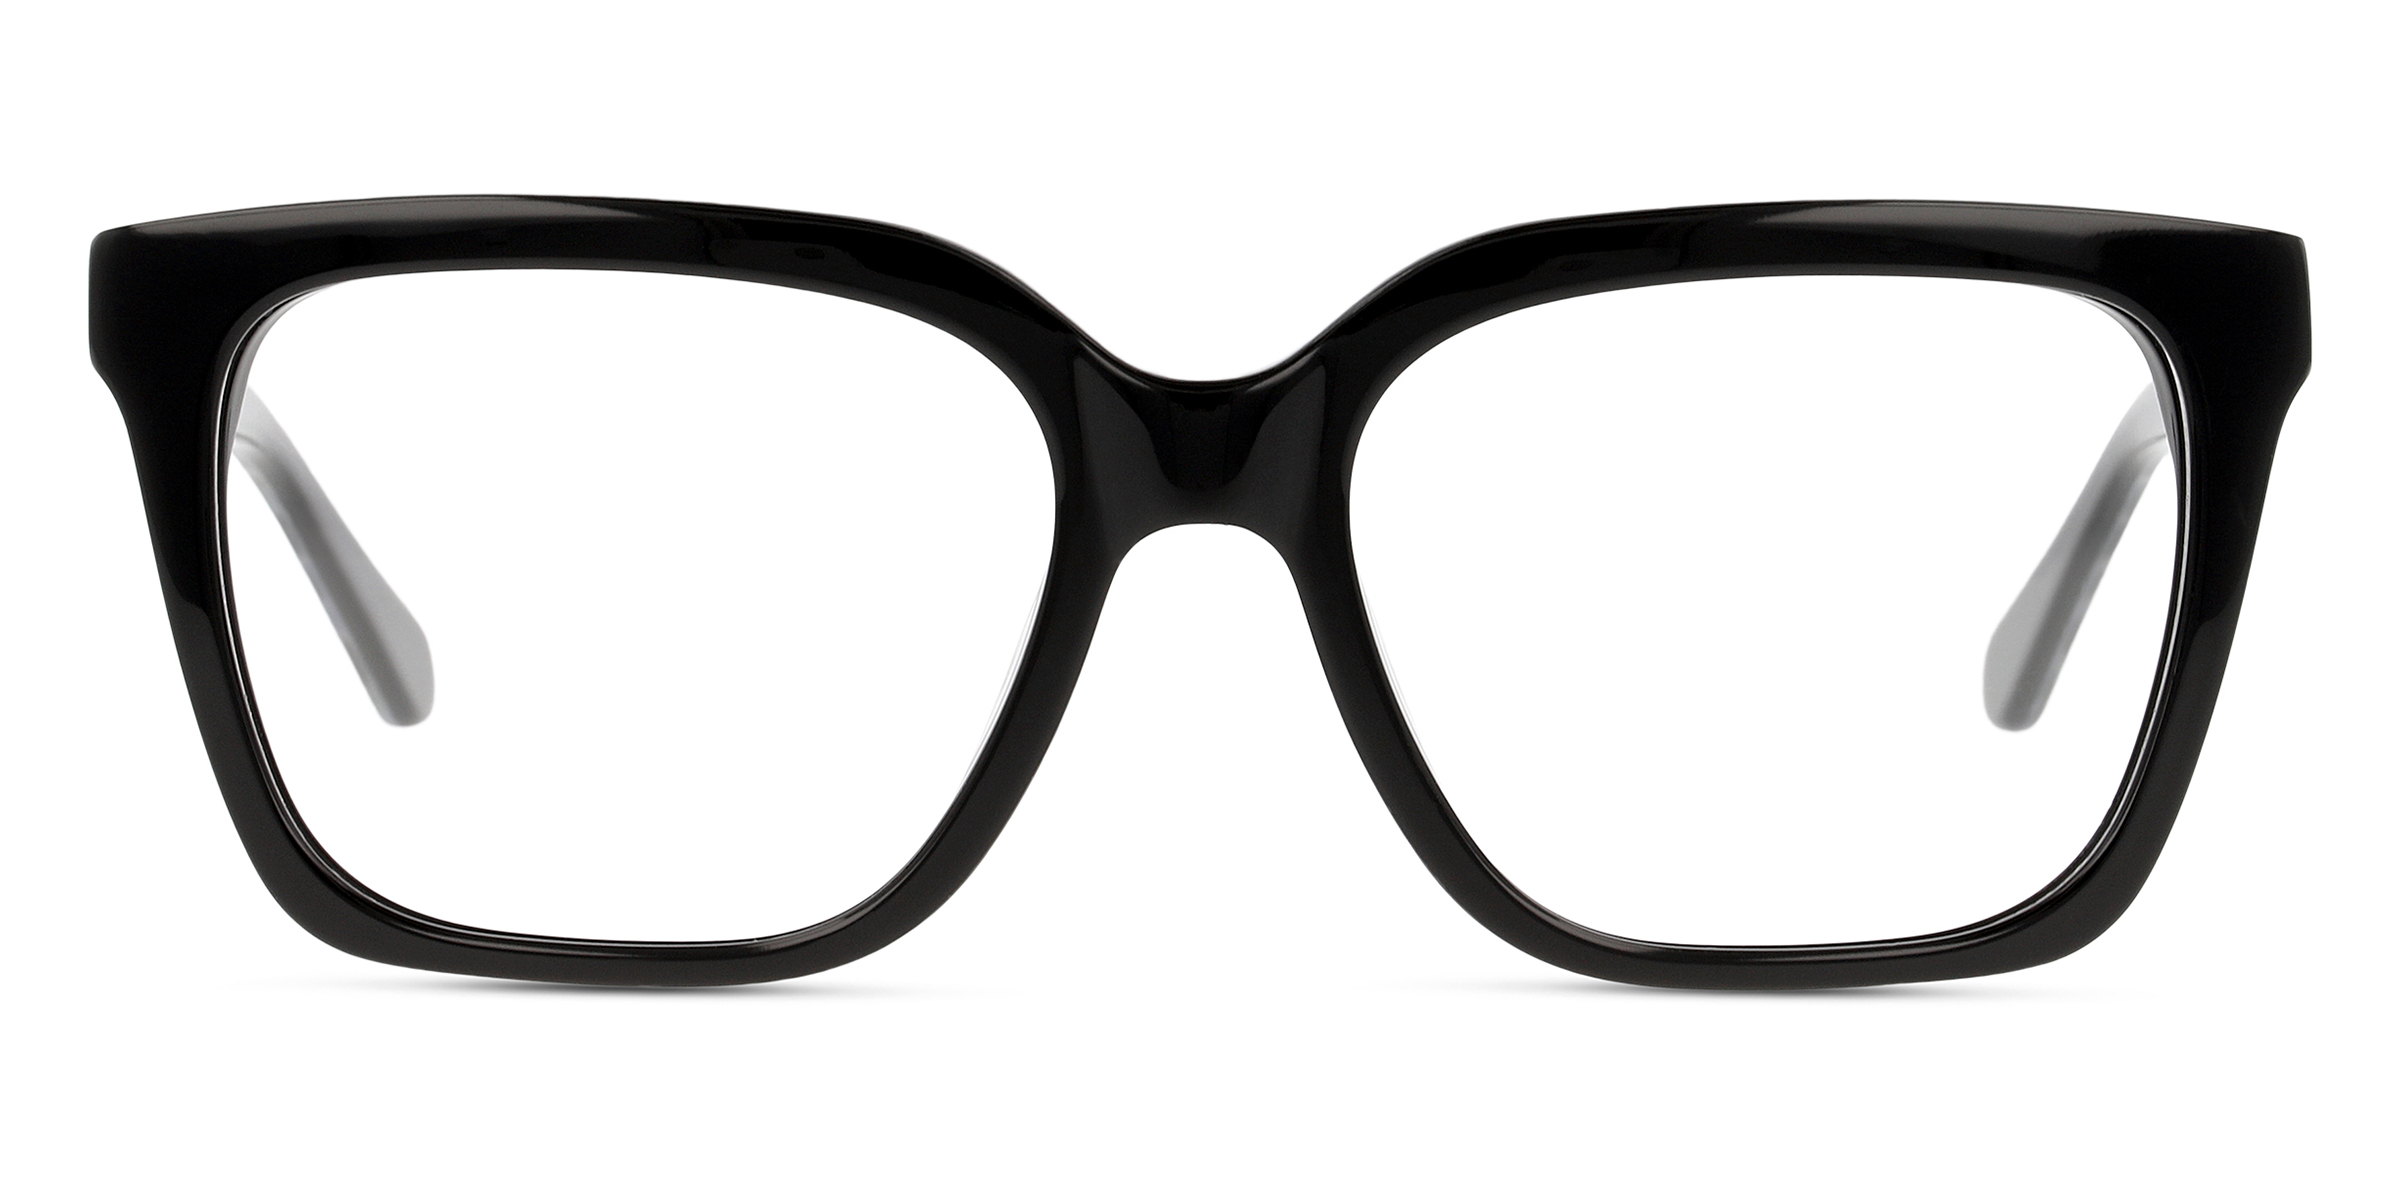 Buy Unofficial UNOF0203 eyeglasses for women at For Eyes